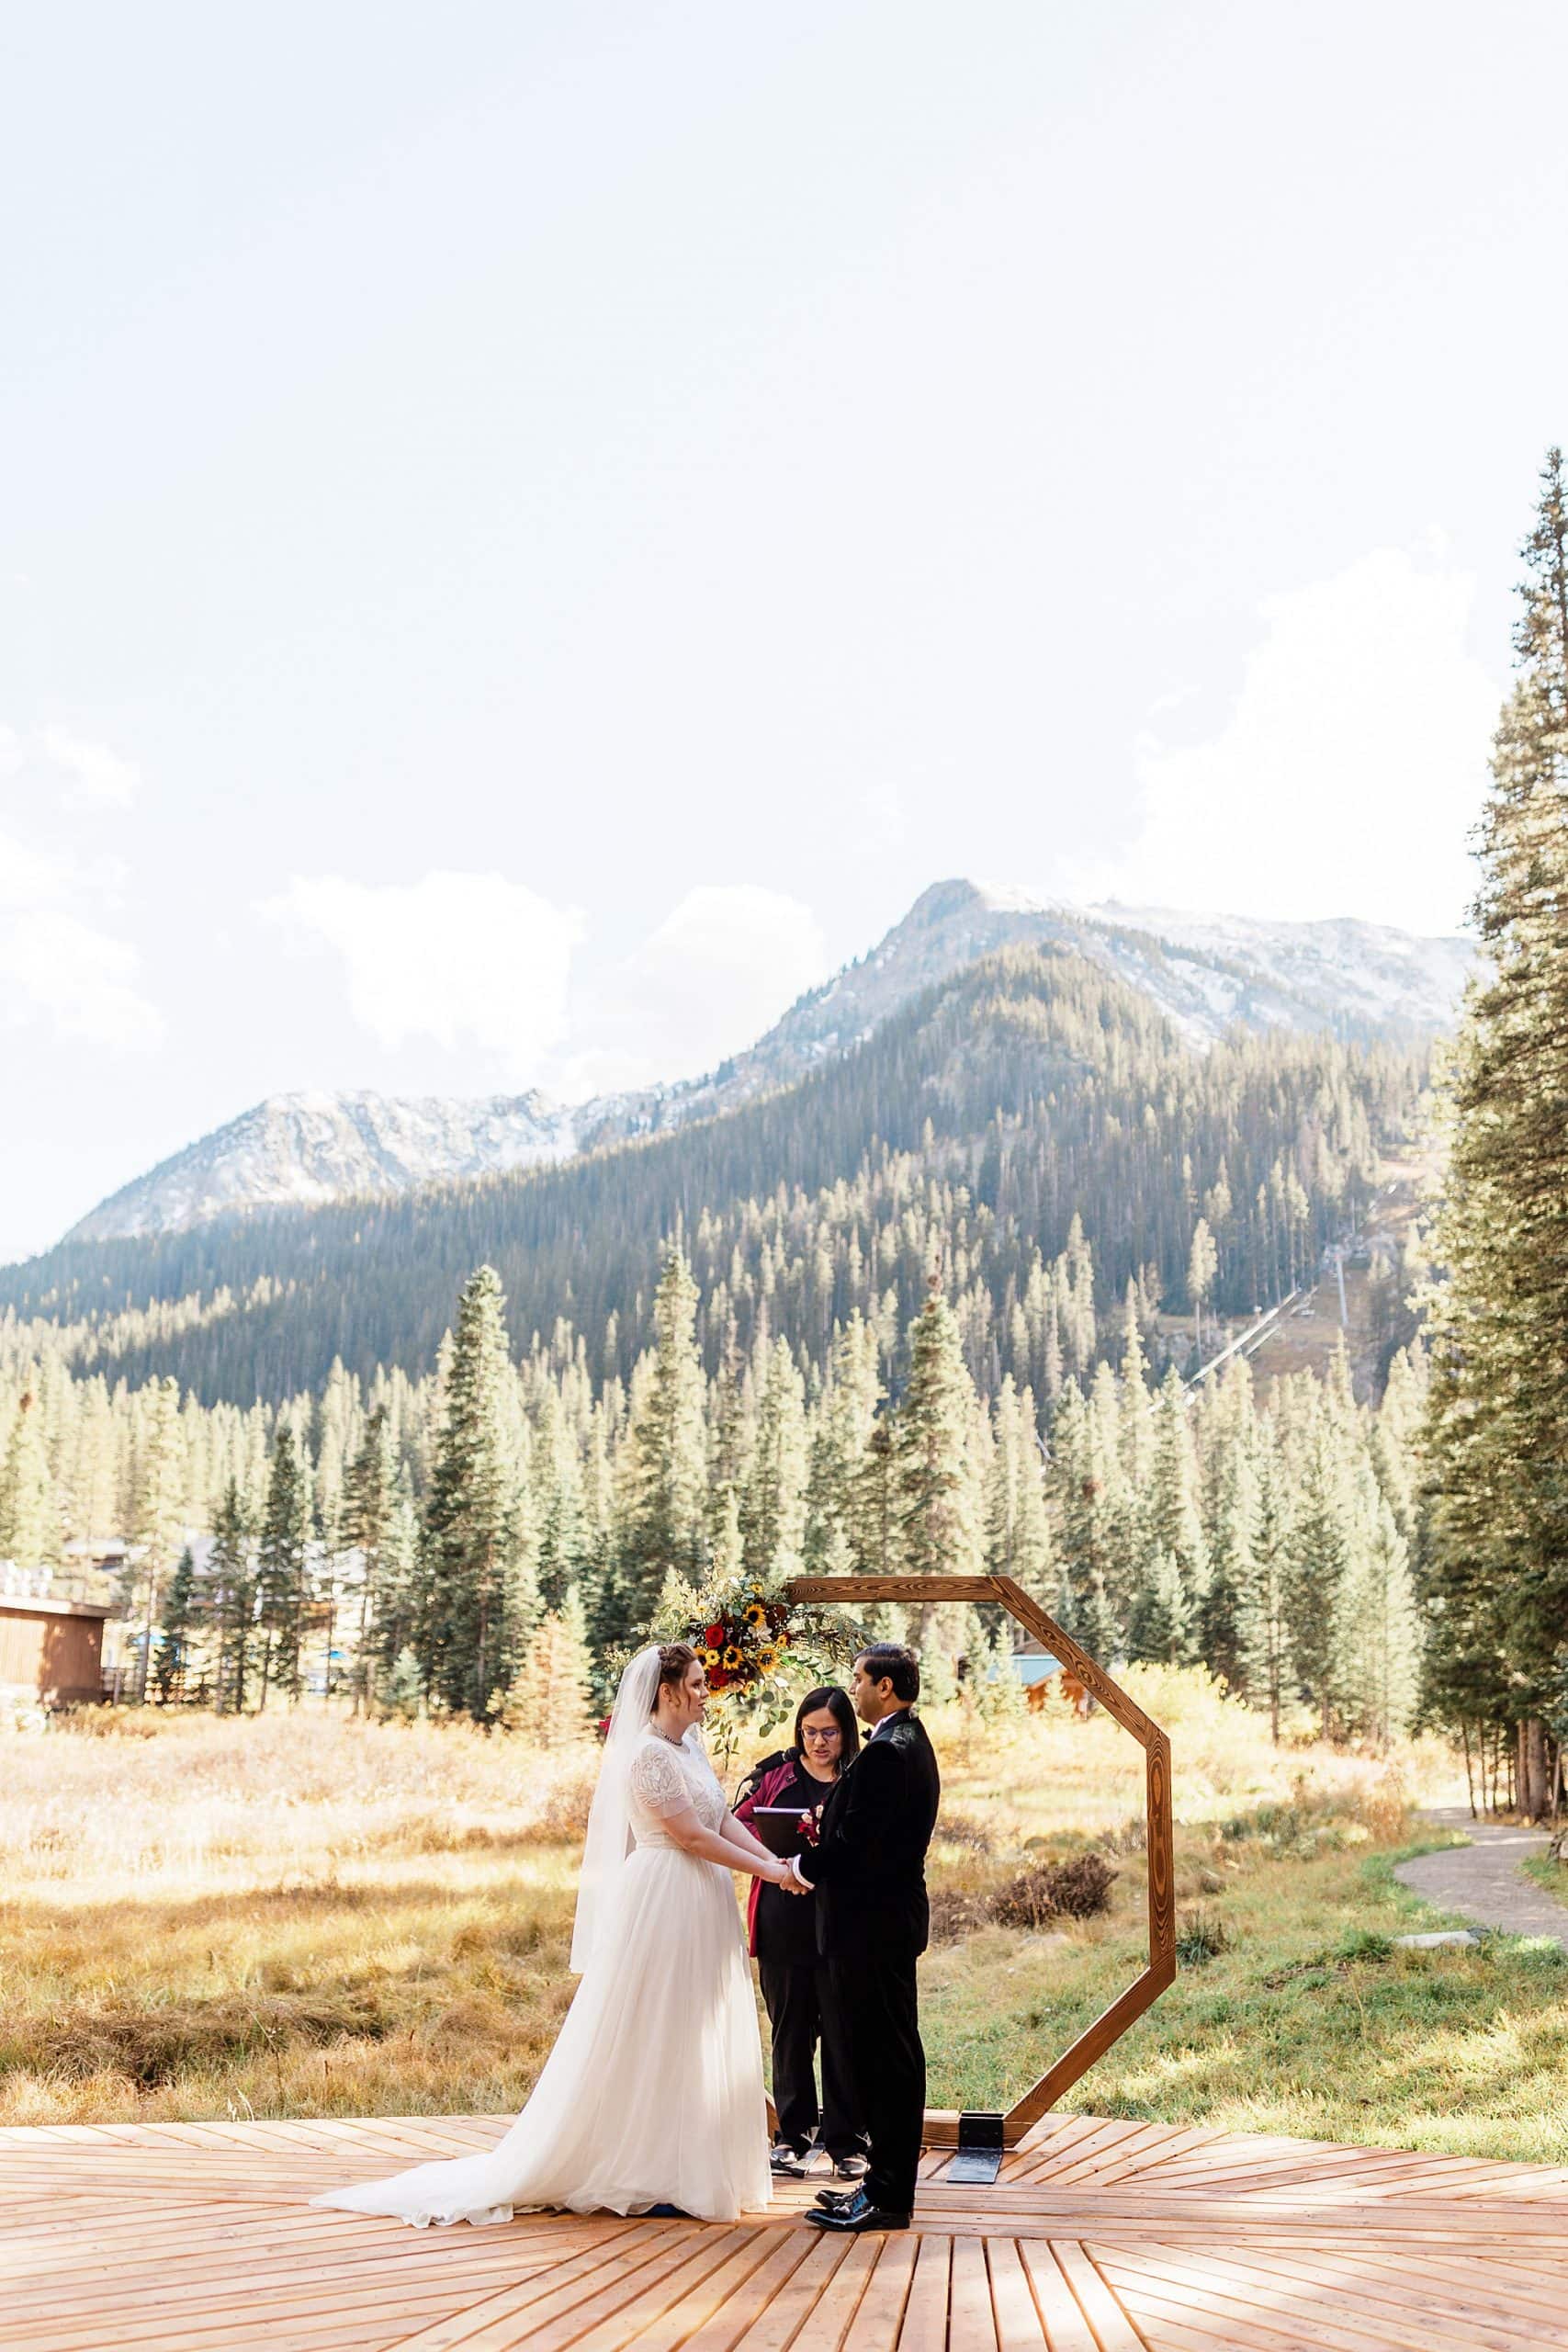 A couple says their vows in front of a wooden arch in Taos Ski Valley